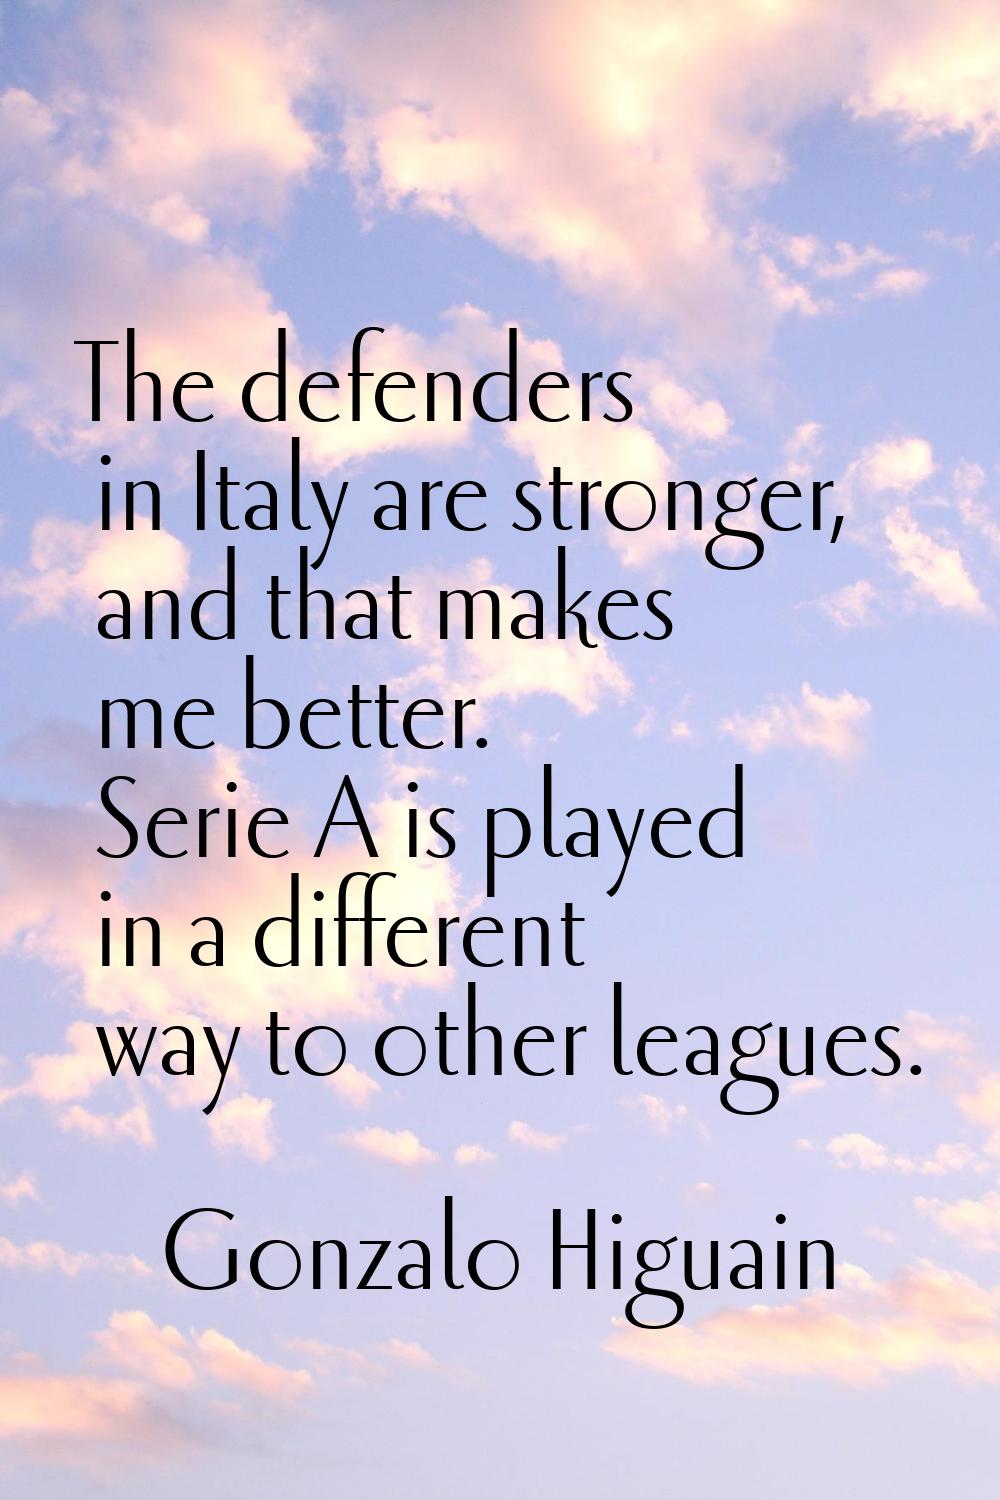 The defenders in Italy are stronger, and that makes me better. Serie A is played in a different way